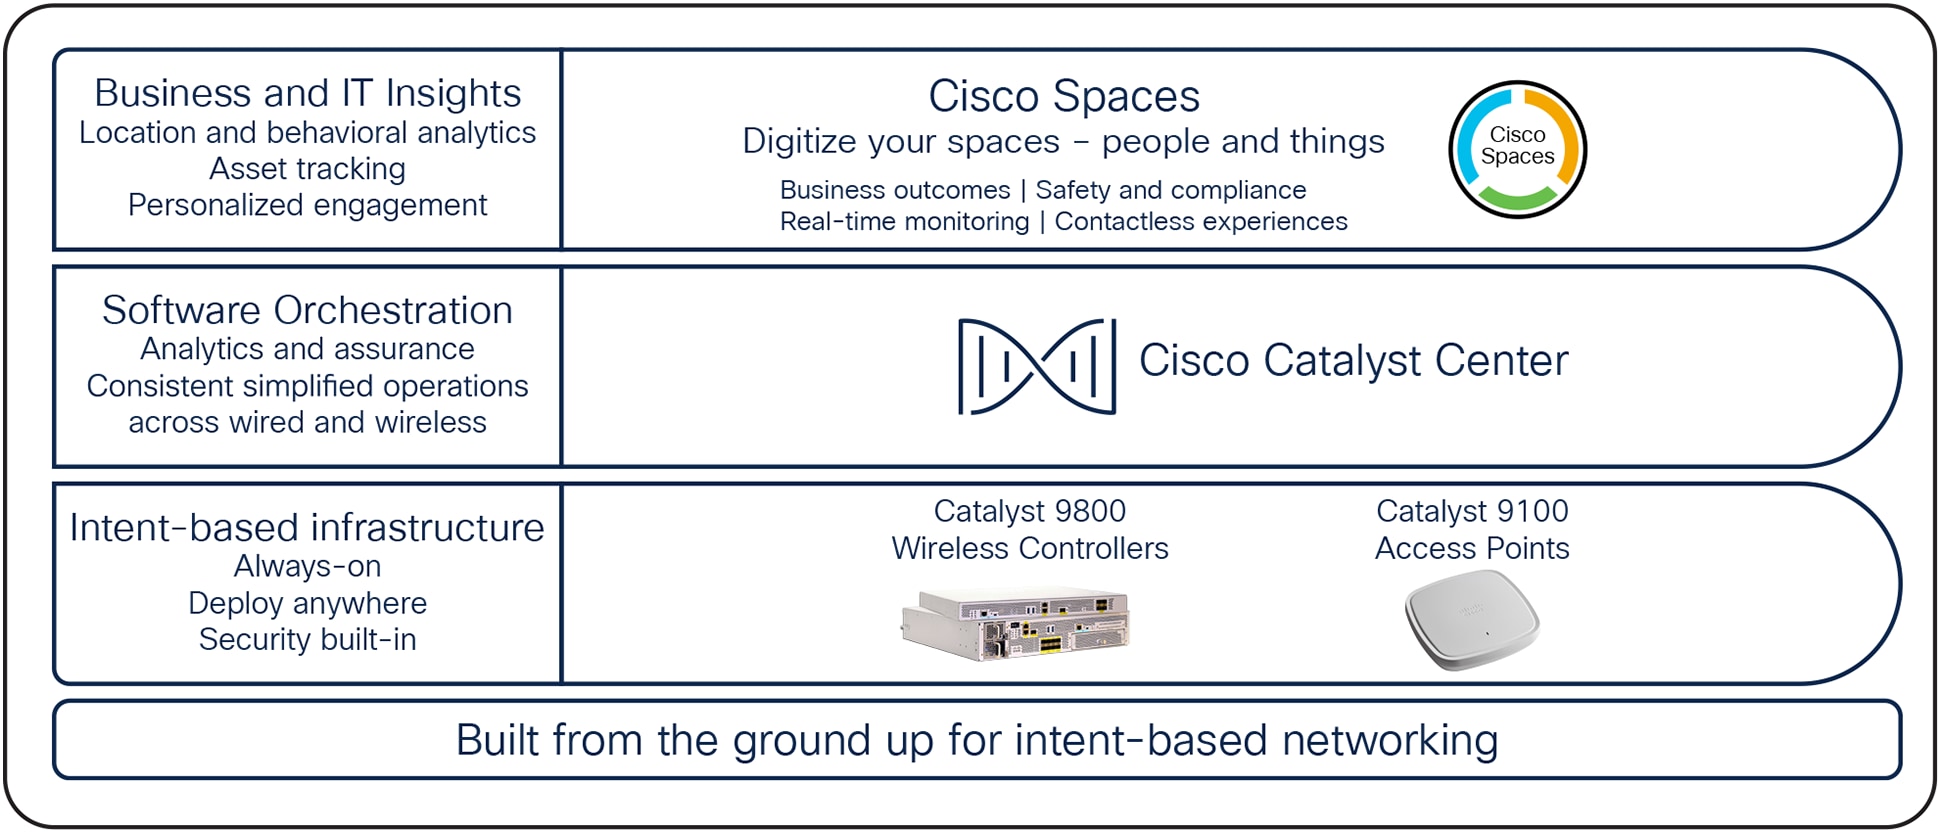 Unlock the power of your network and drive IoT outcomes at scale